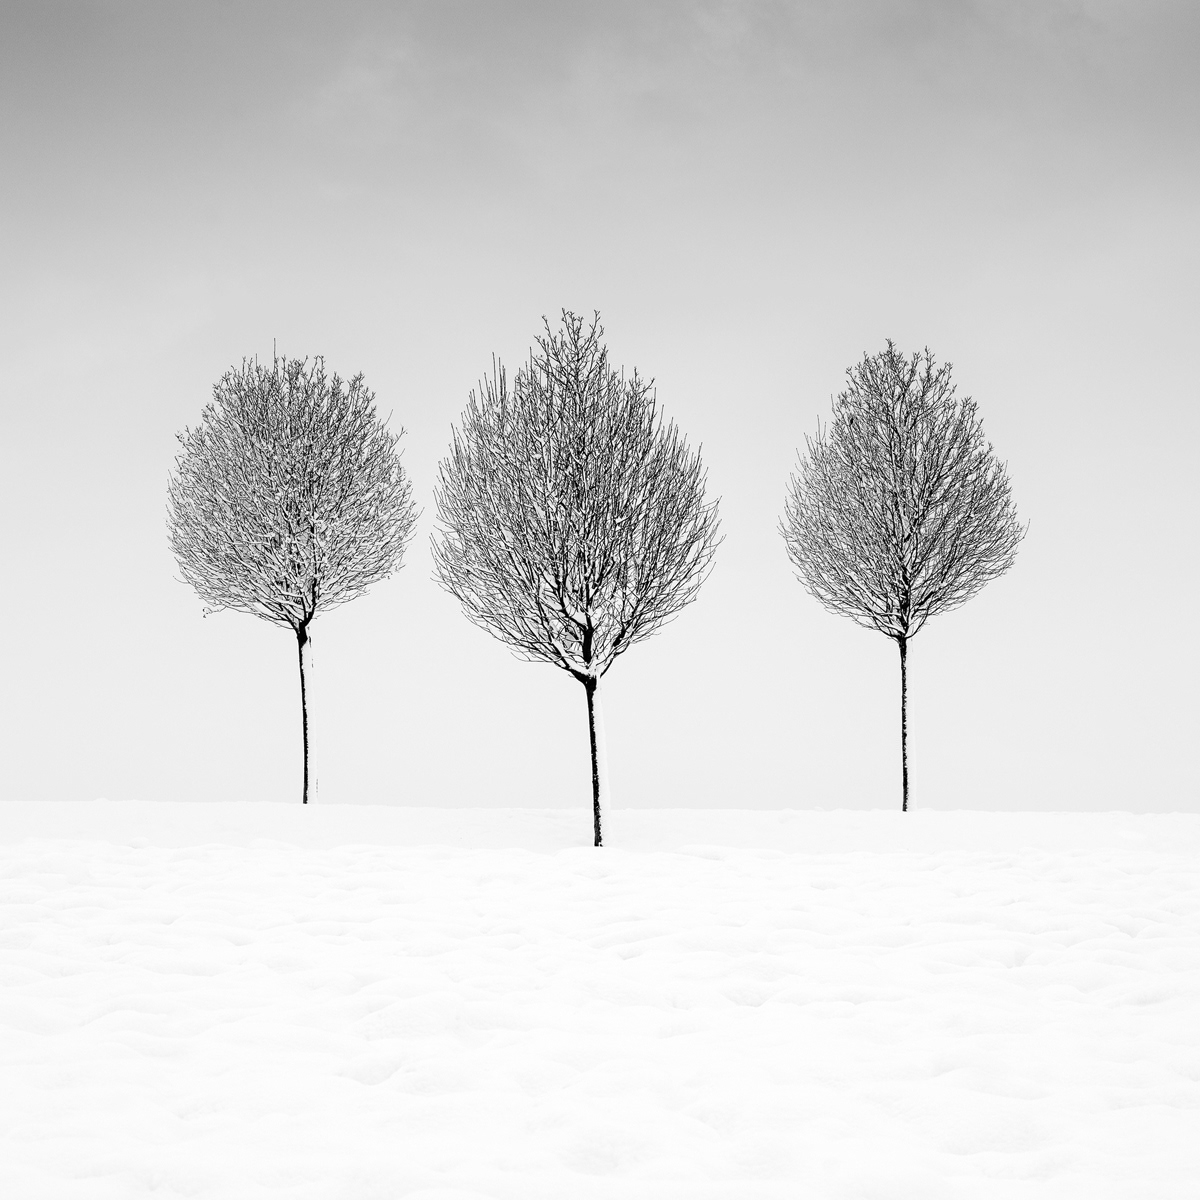 alley black and white dog Landscape Minimalism Nature snow trees walk winter